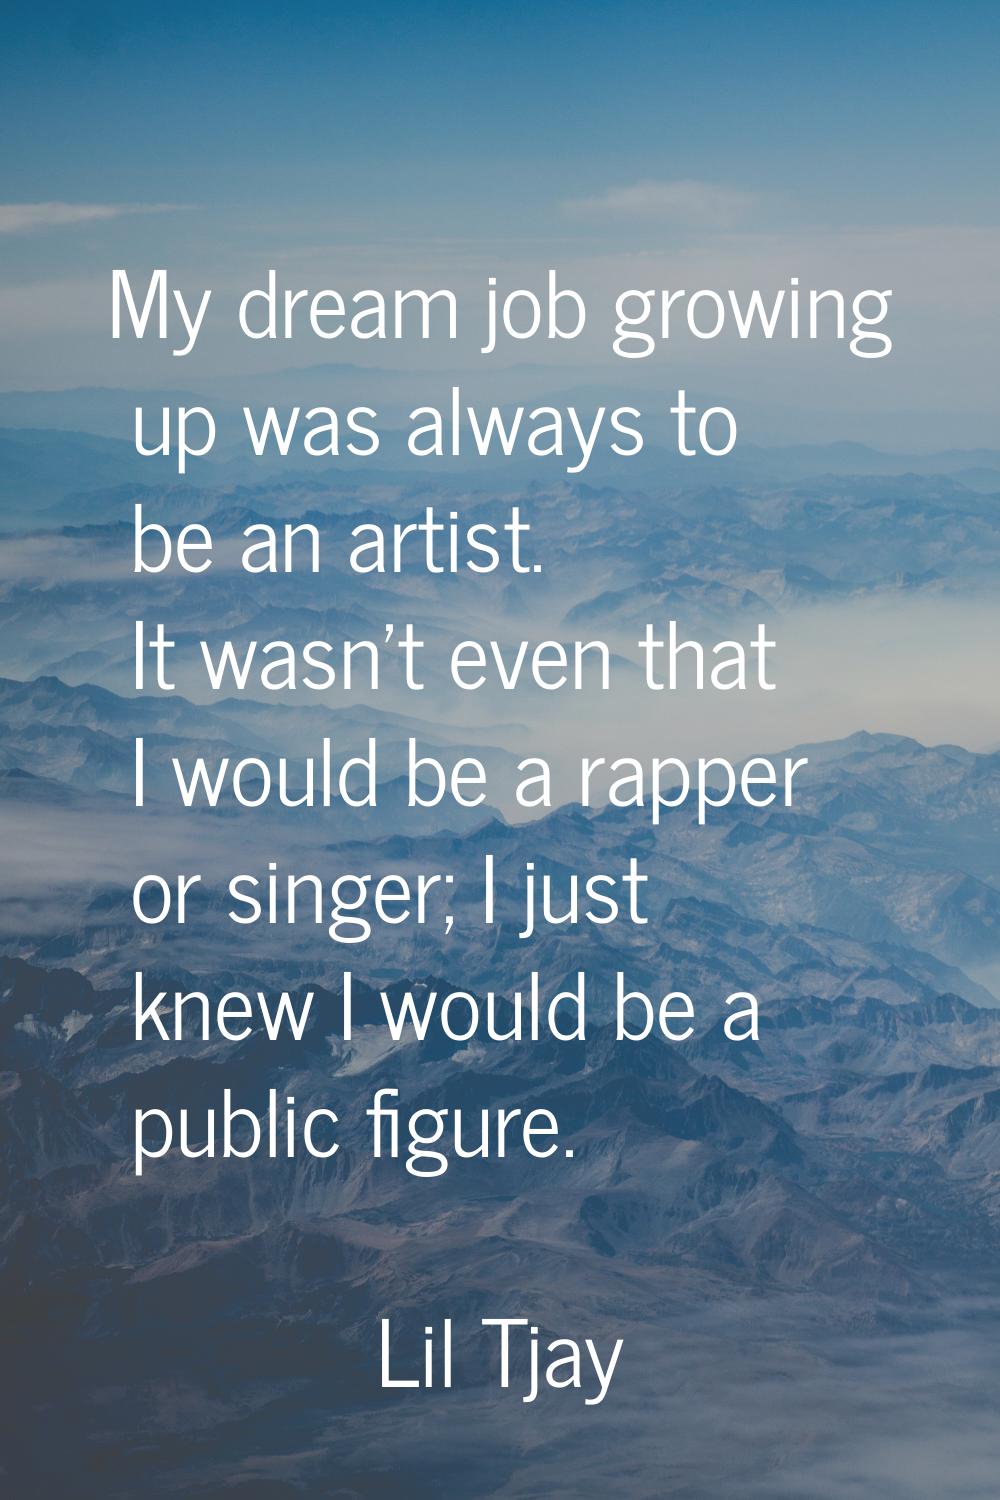 My dream job growing up was always to be an artist. It wasn't even that I would be a rapper or sing